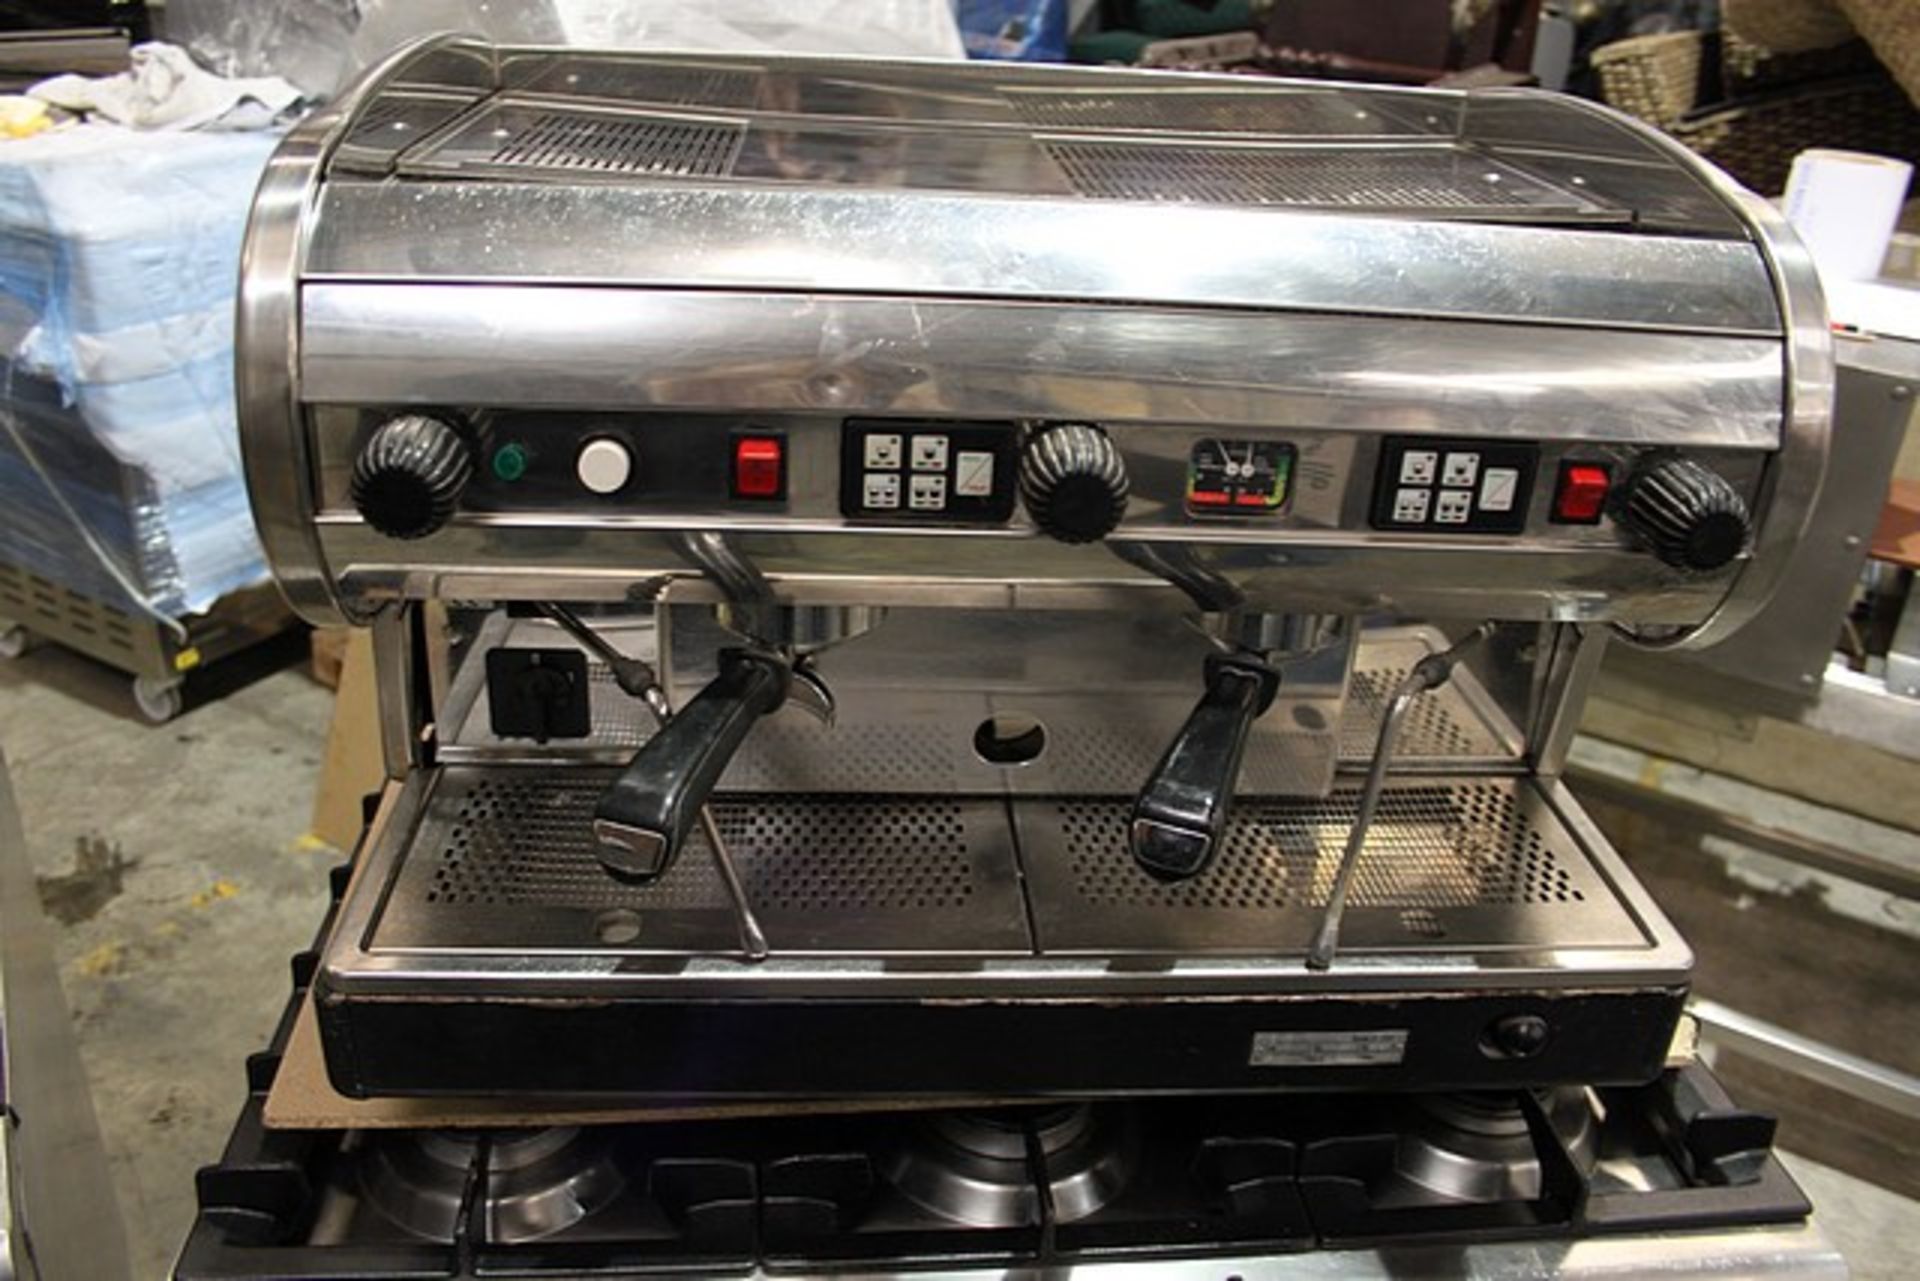 CMA CMF.2 two group commercial coffee machine fully automatic 12 litre boiler 710mm x 530mm x